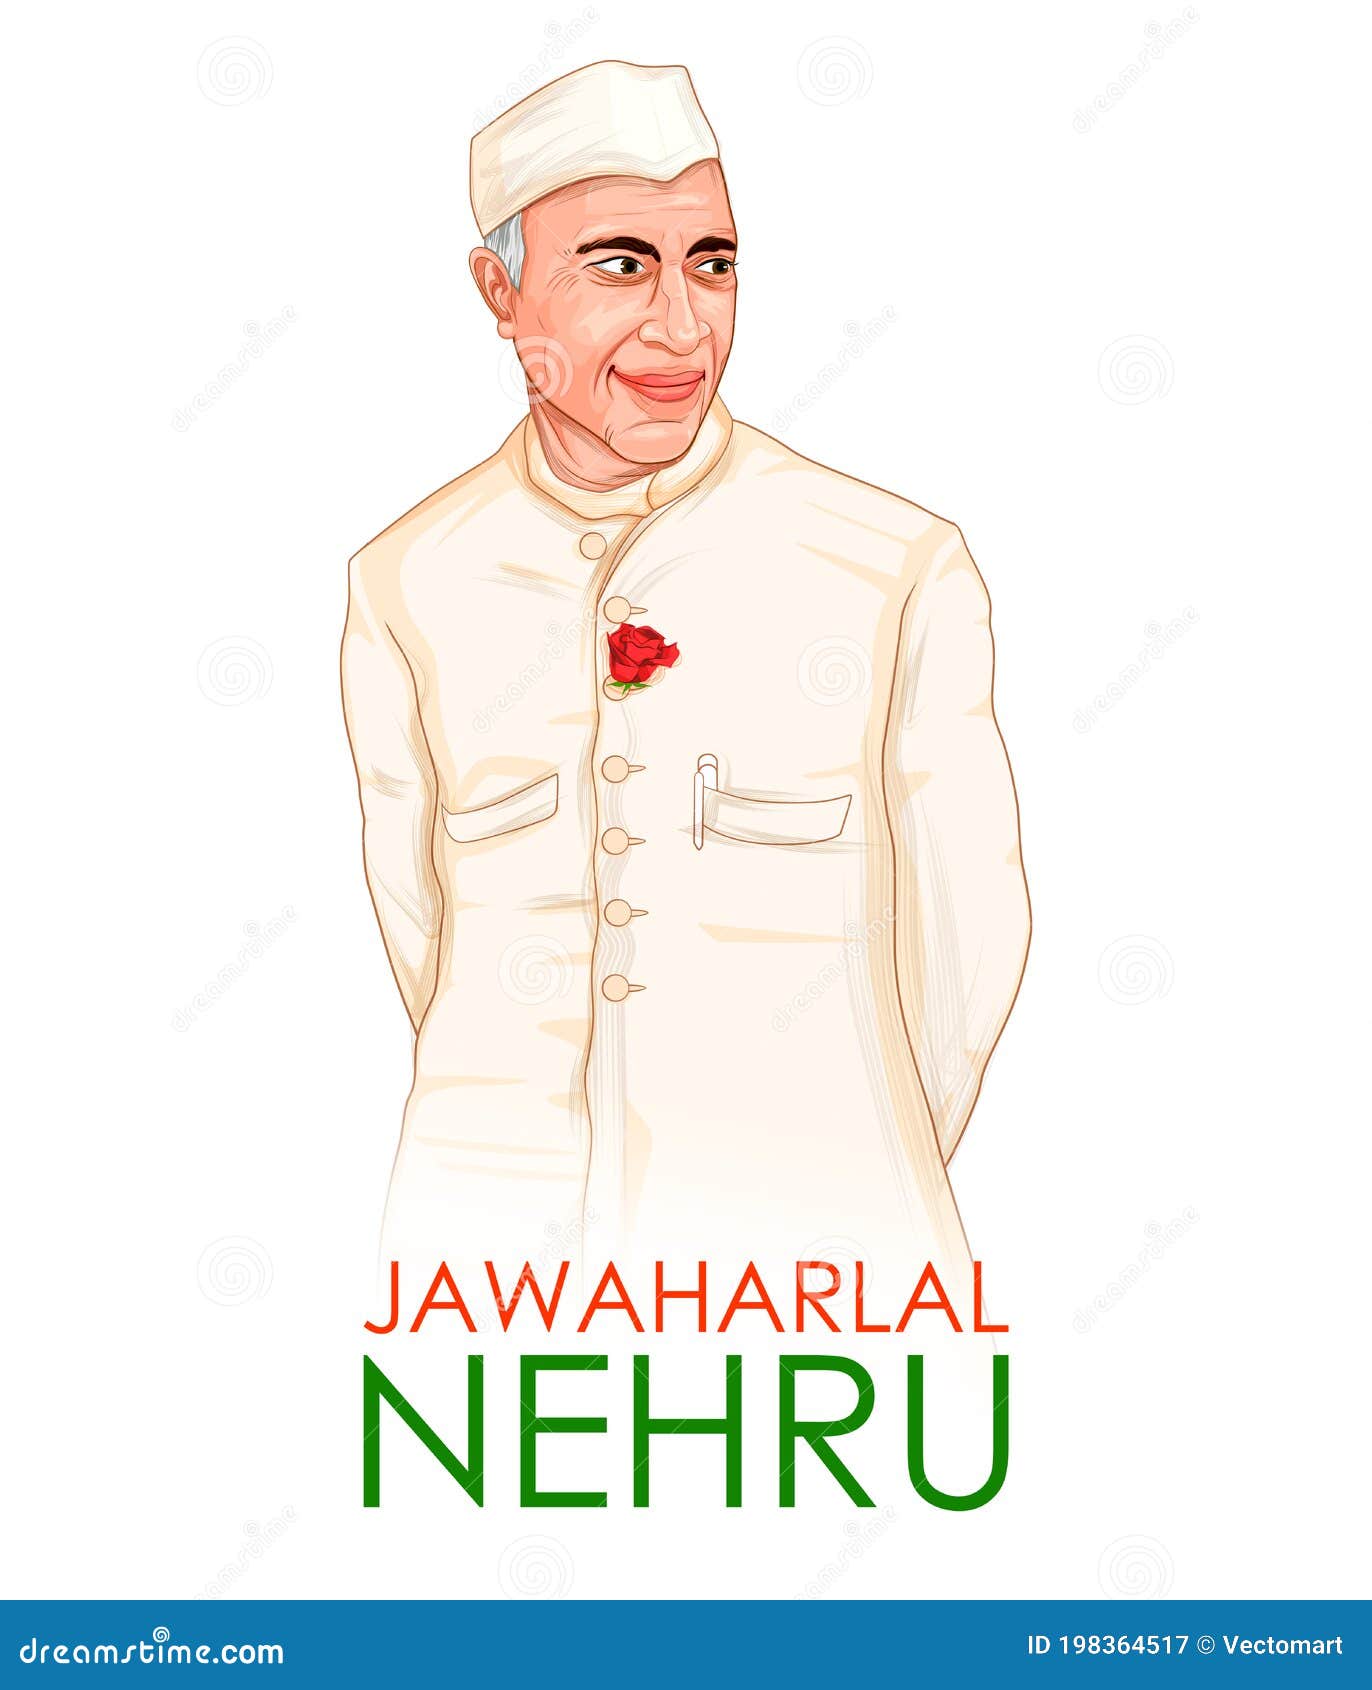 Jawaharlal Nehru: The Architect of Modern India - ClearIAS